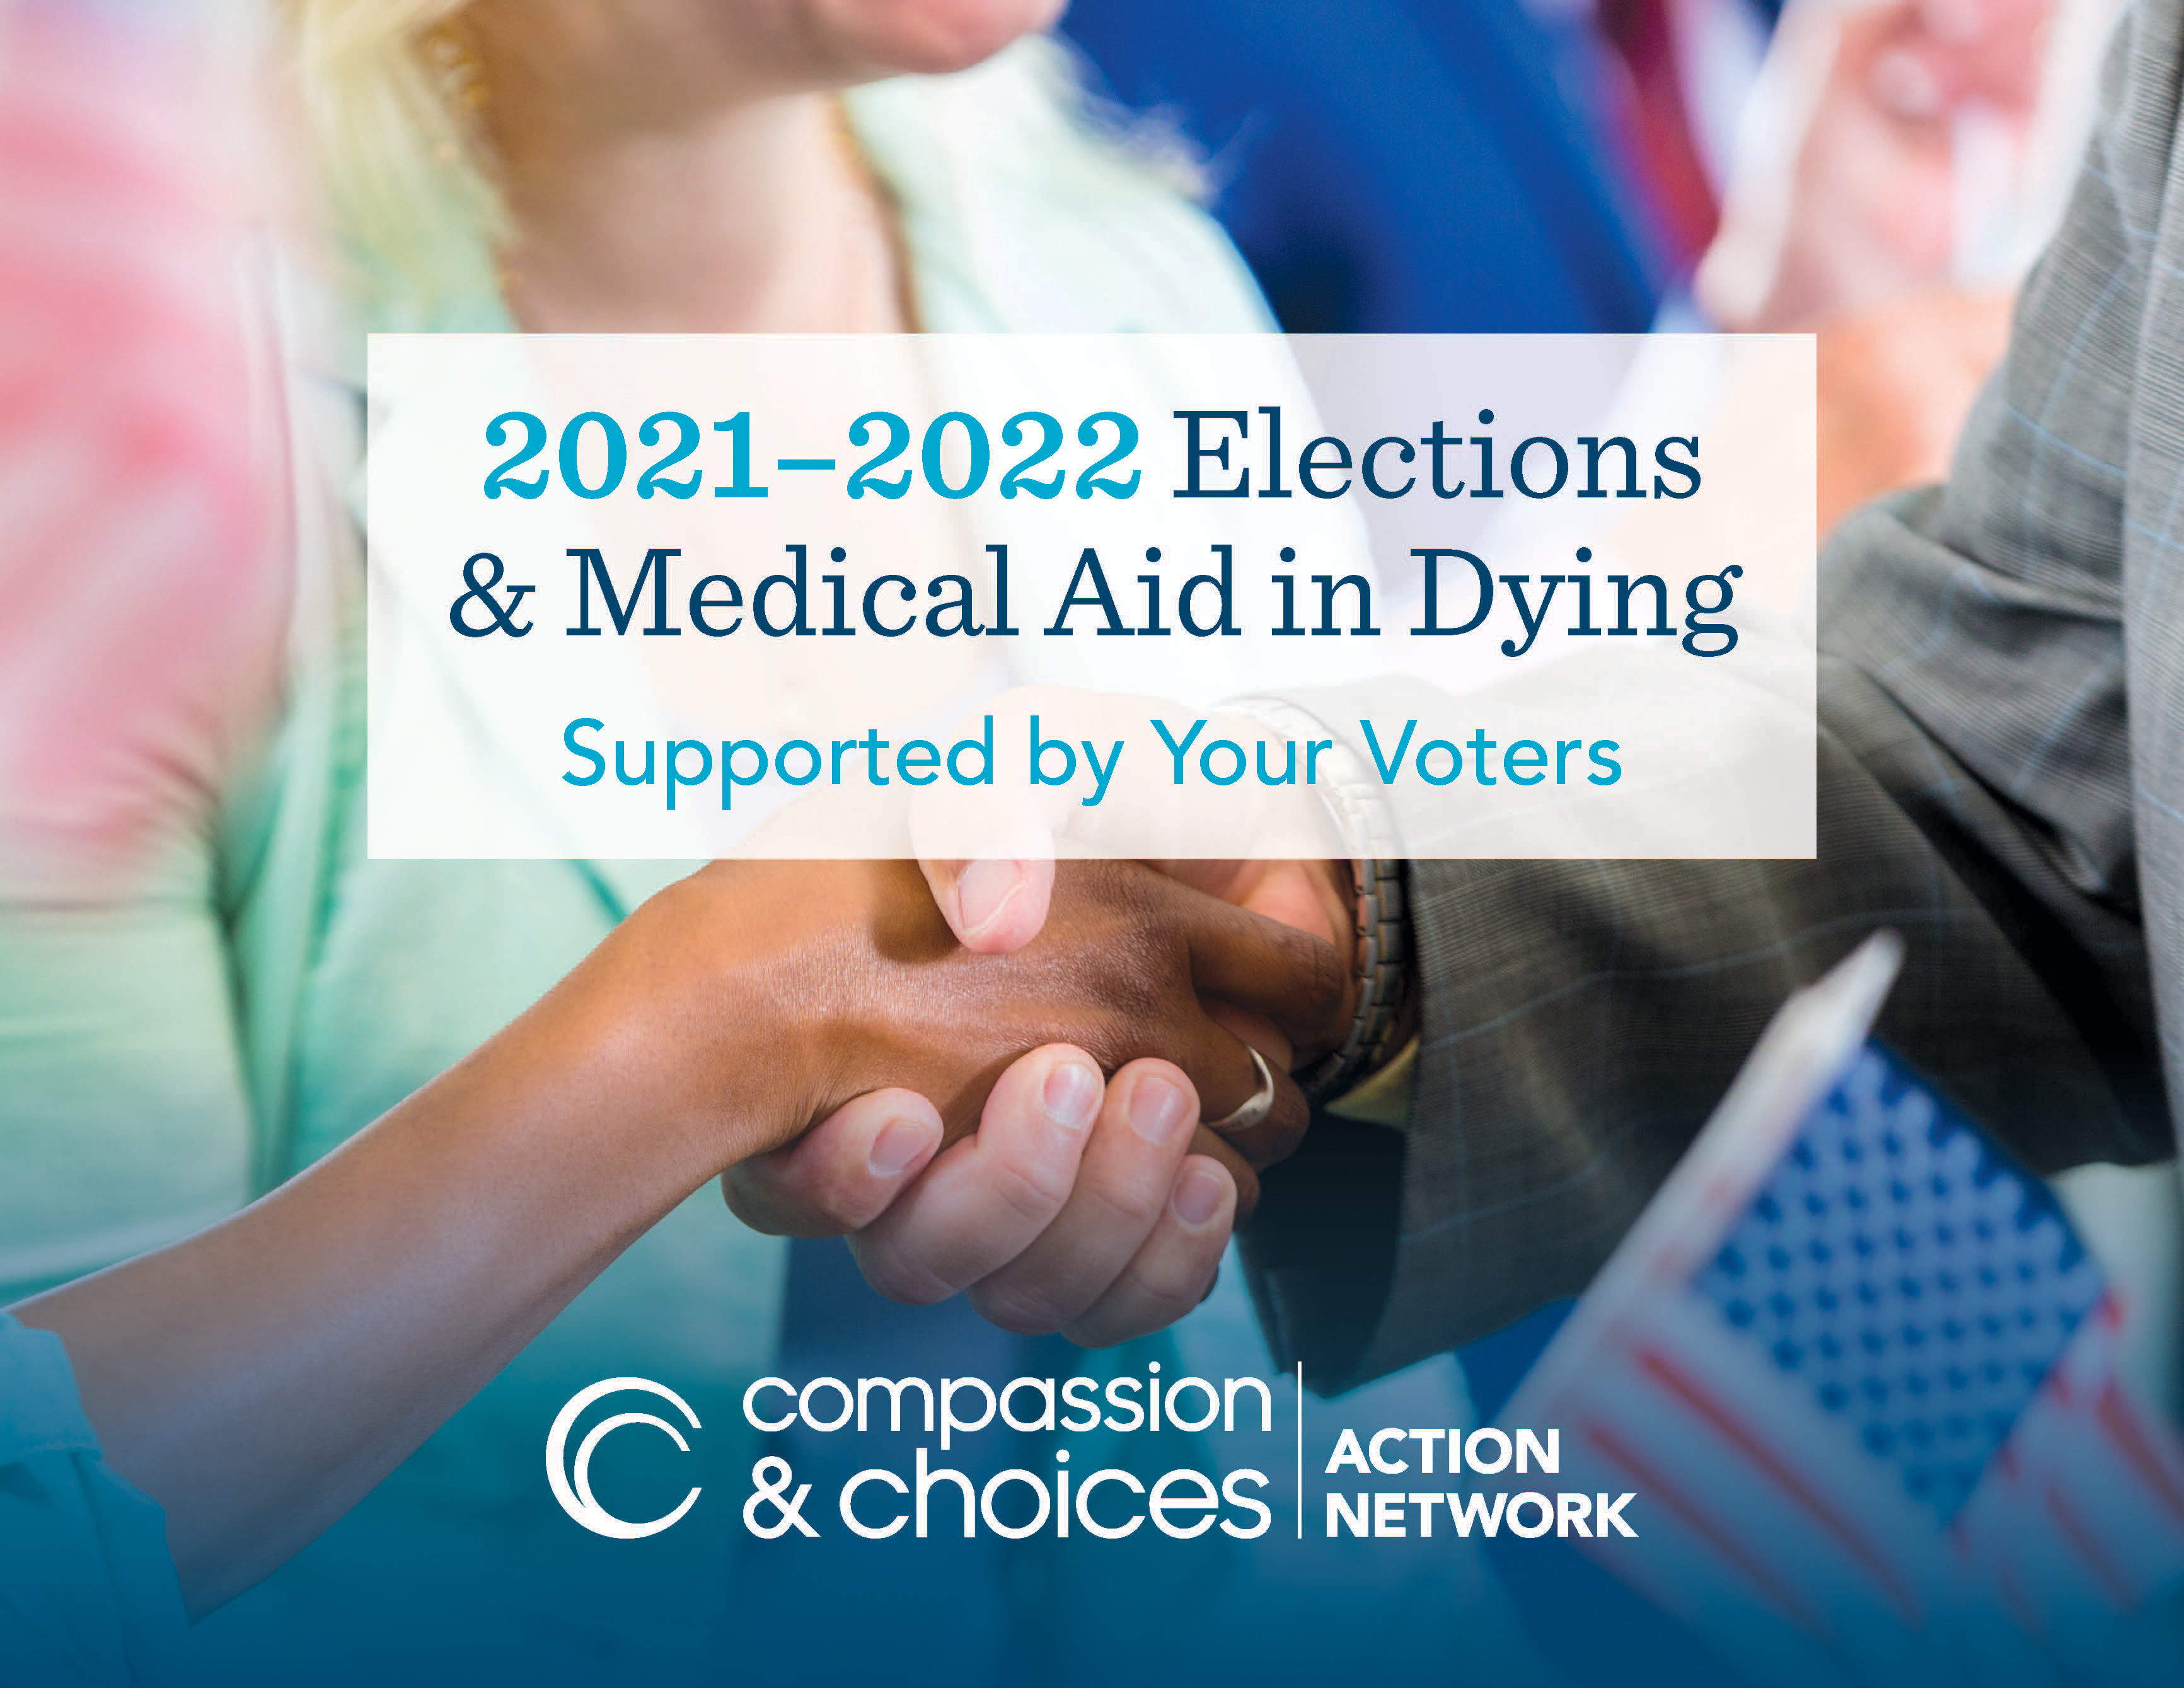 2021 - 2022 Elections & Medical Aid in Dying Report Cover